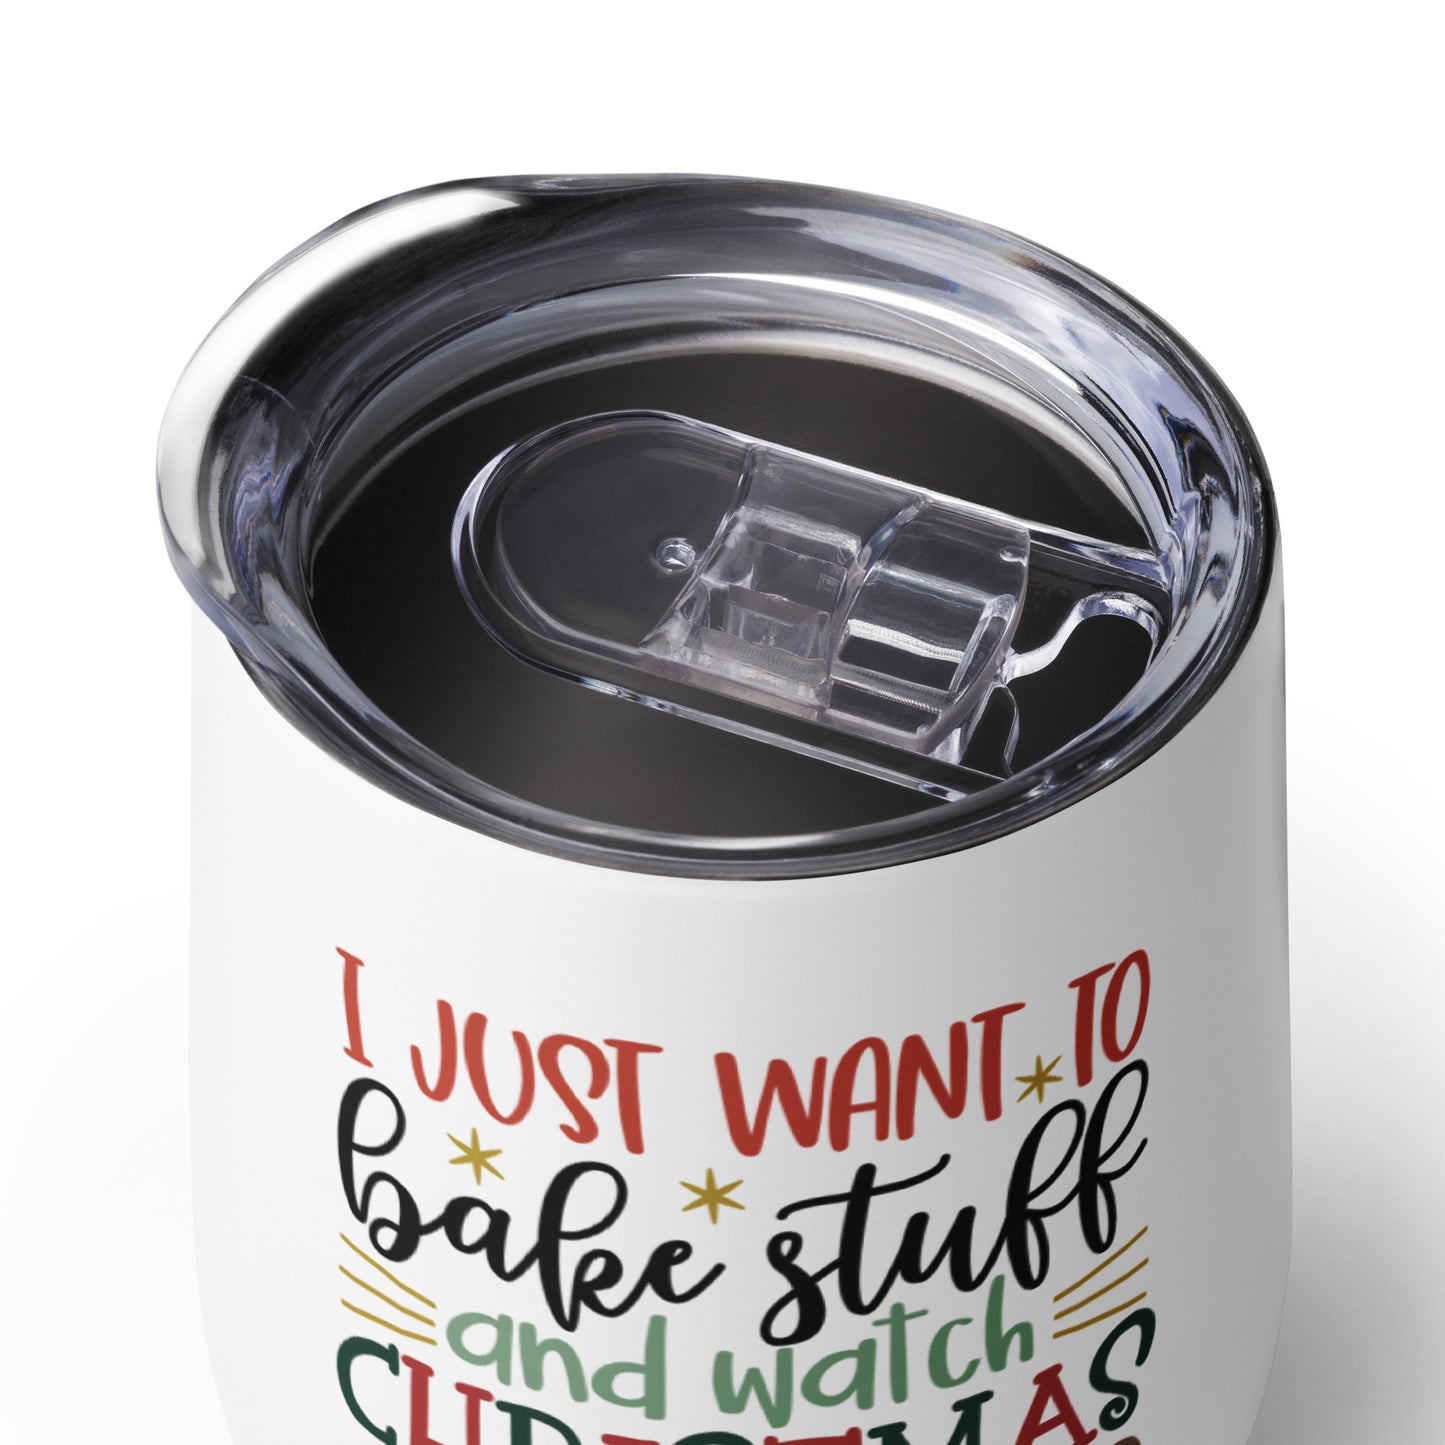 I Just Want to Bake Stuff & Watch Christmas Movies Wine Tumbler